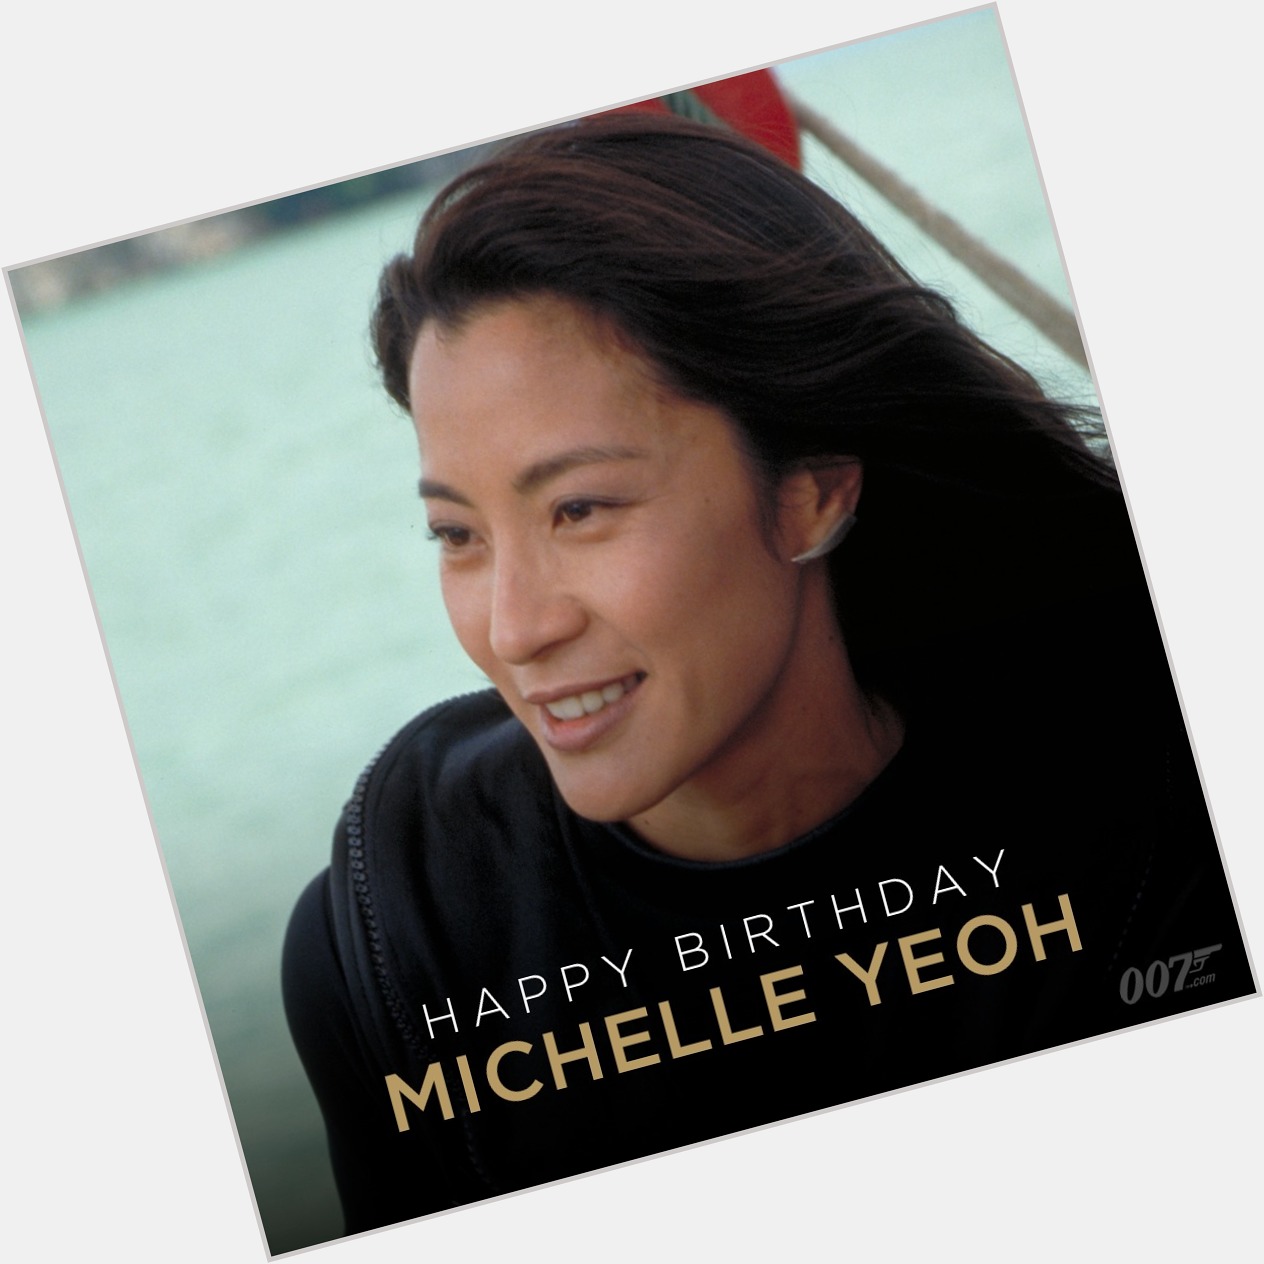 Don t get any ideas just wish Happy Birthday to Michelle Yeoh, who played Wai Lin in TOMORROW NEVER DIES (1997). 